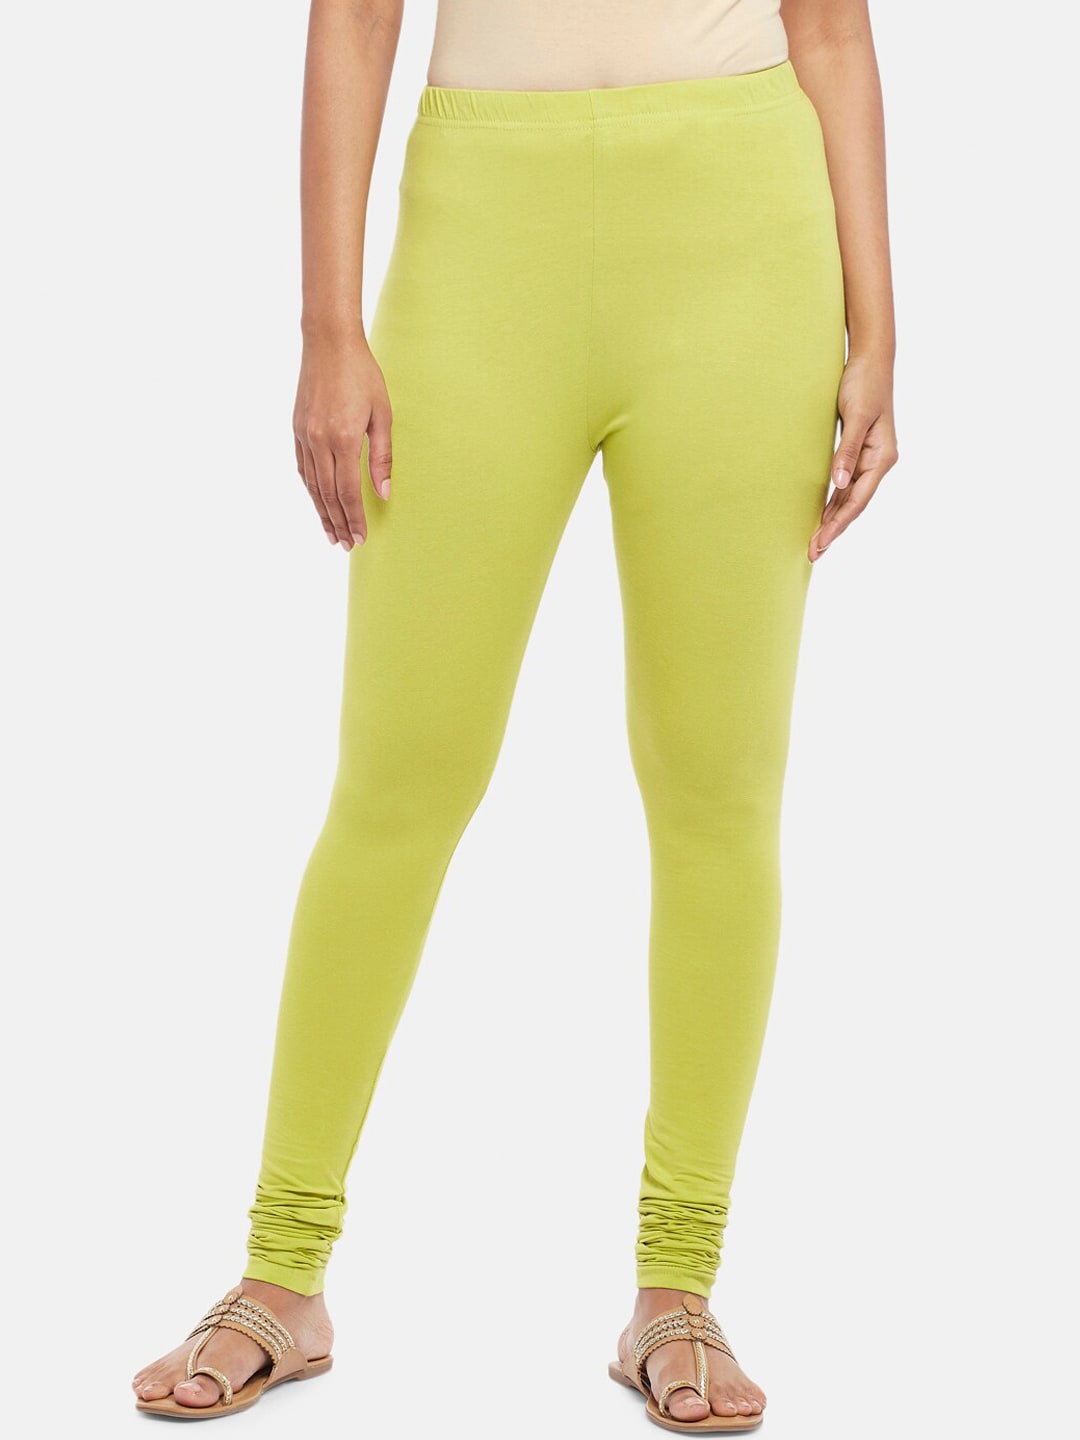 RANGMANCH BY PANTALOONS Lime Green Solid Leggings Price in India, Full  Specifications & Offers